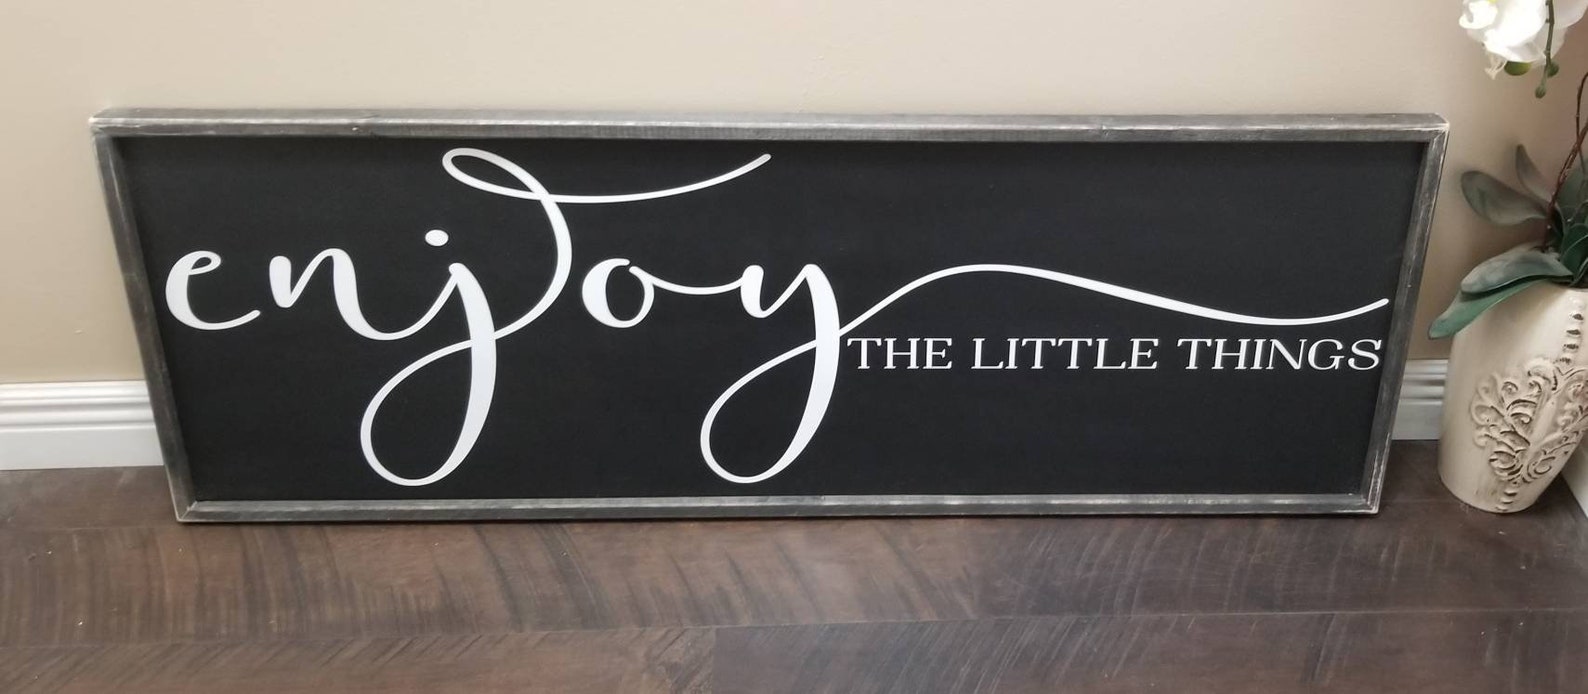 Enjoy the Little Things Sign Enjoy the Little Things Bedroom | Etsy